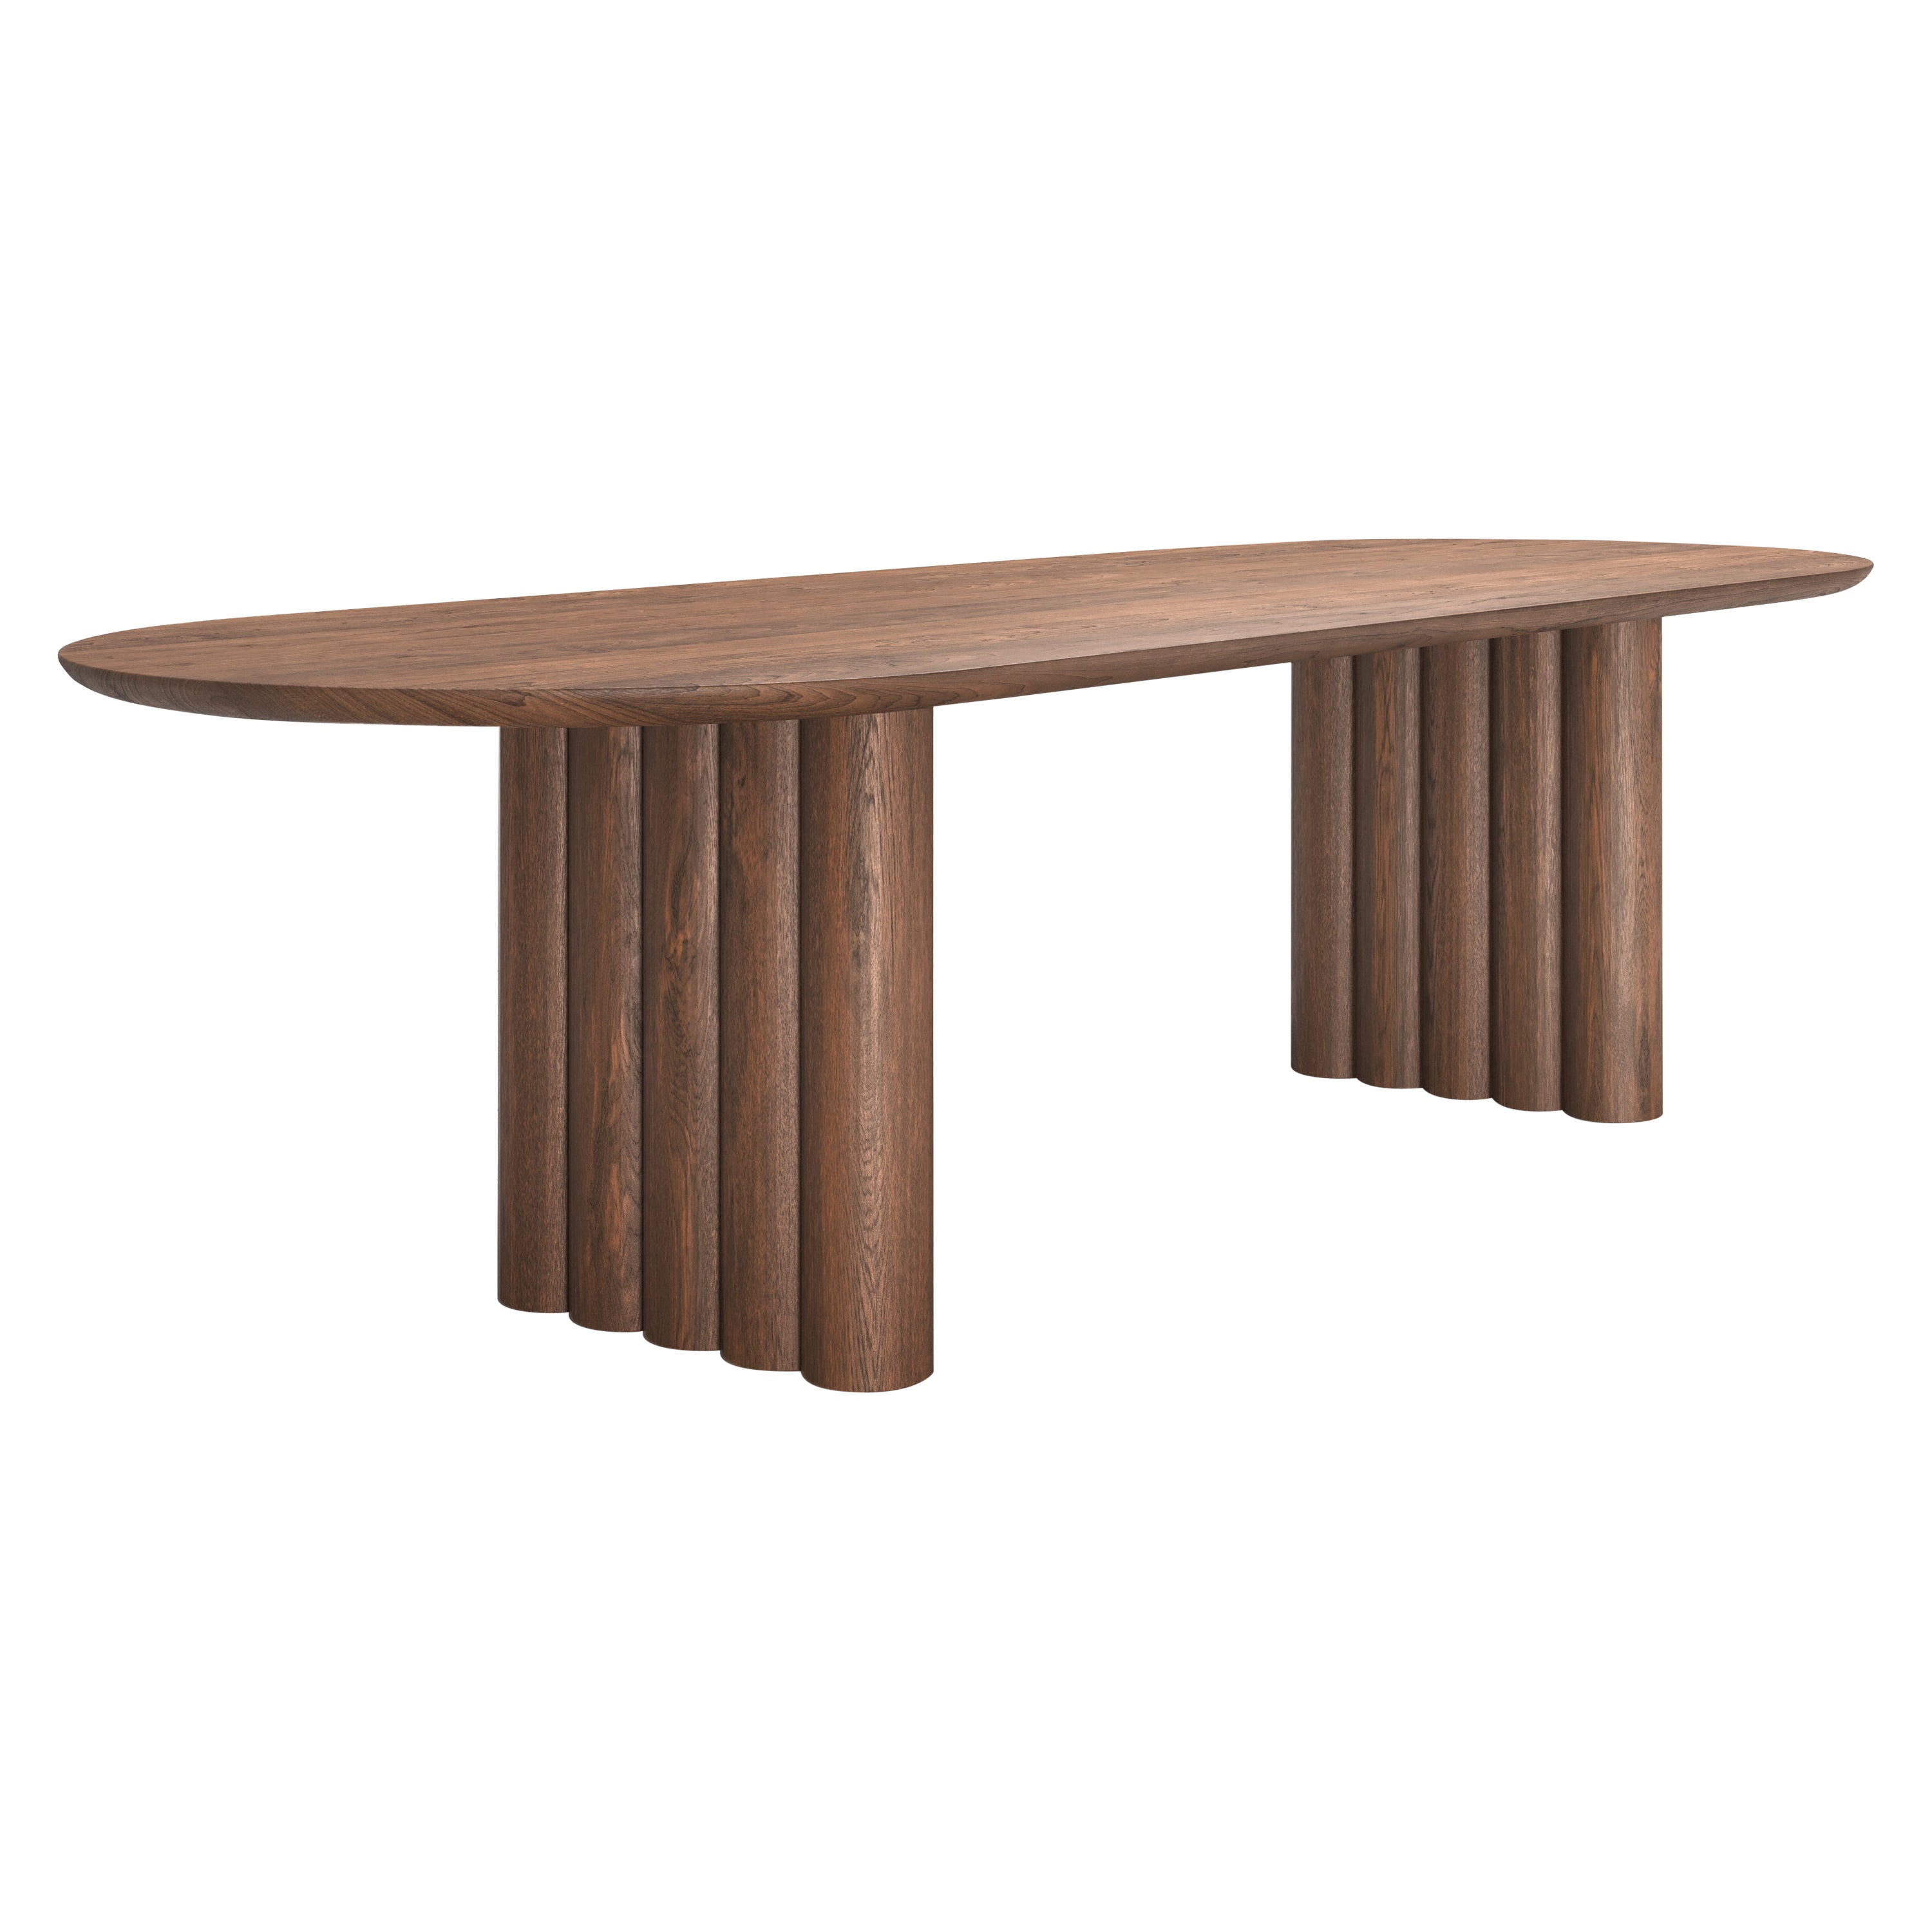 Contemporary Dining Table 'Plush' by Dk3, Smoked Oak or Walnut, 200